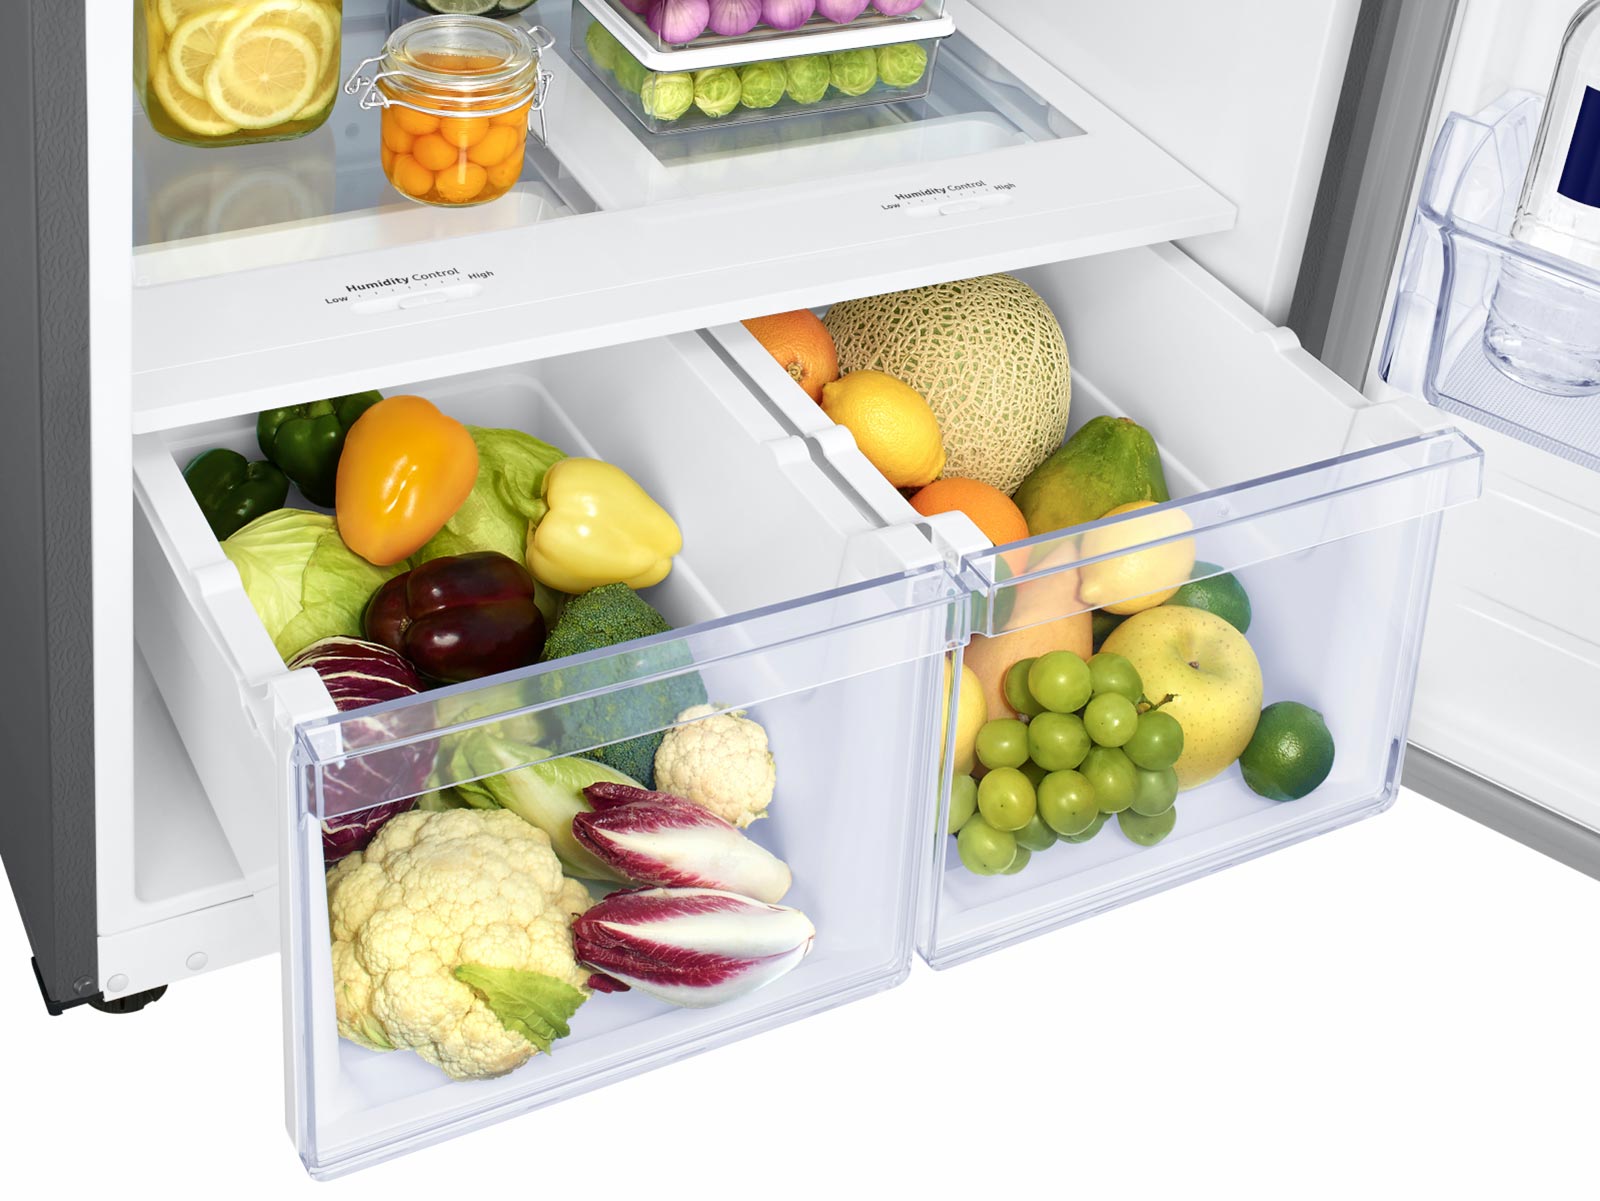 Thumbnail image of 18 cu. ft. Top Freezer Refrigerator with FlexZone™ and Ice Maker in Stainless Steel